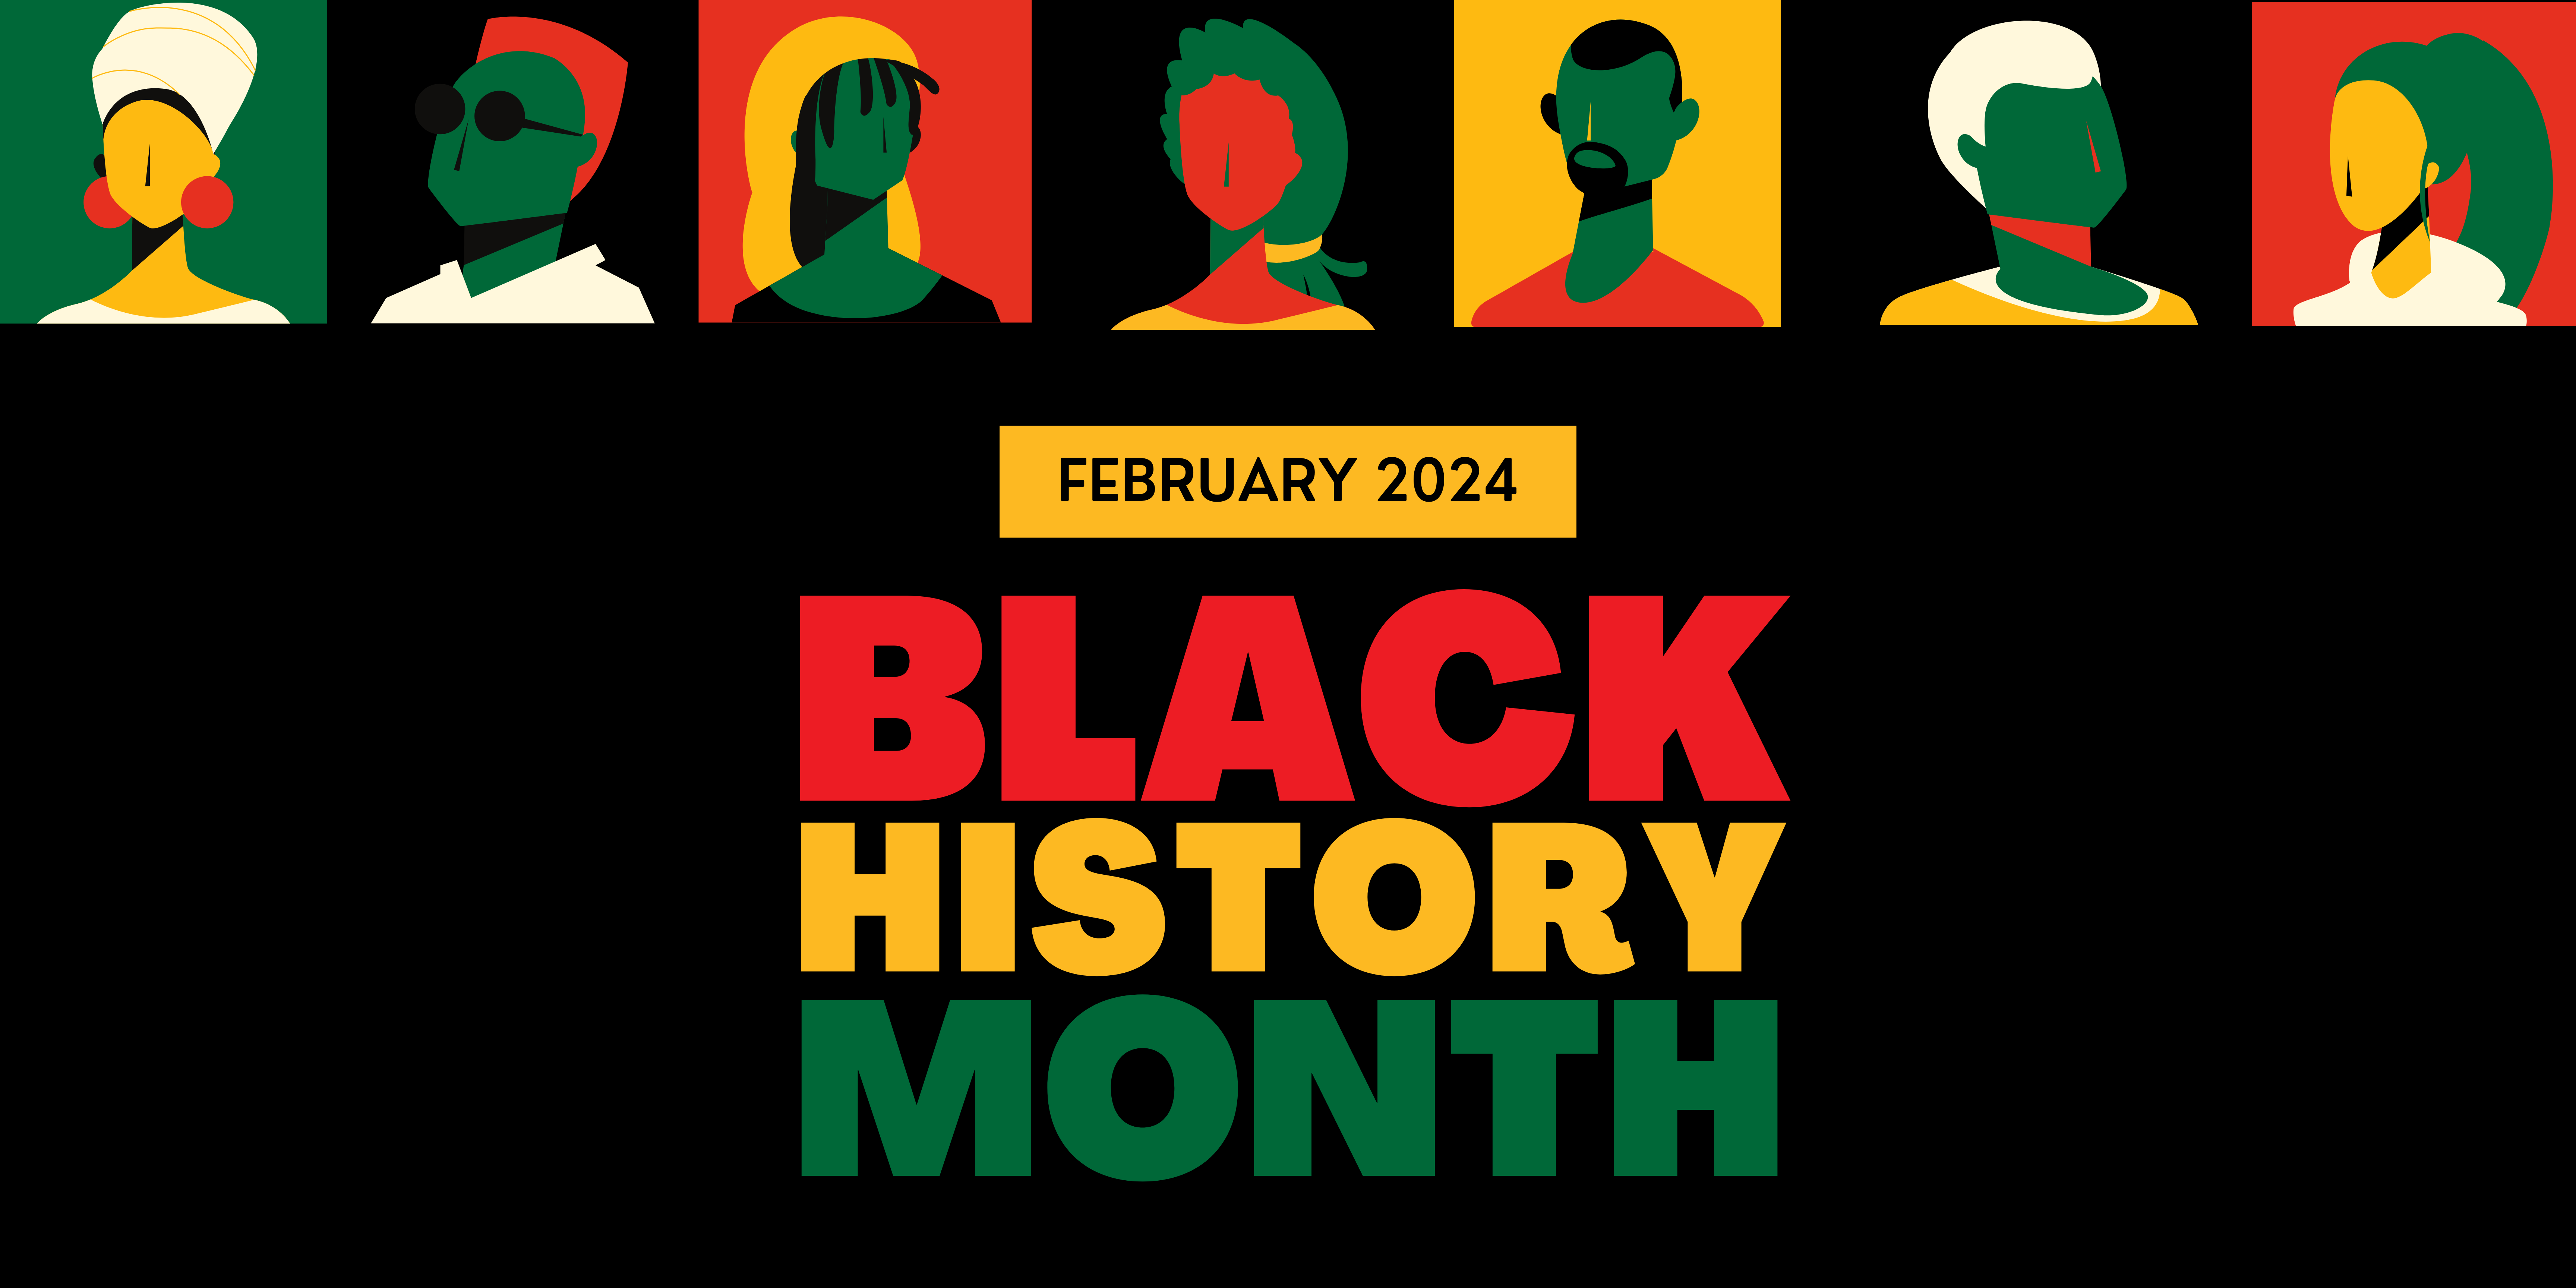 Black banner that reads "February 2024 - Black History Month"